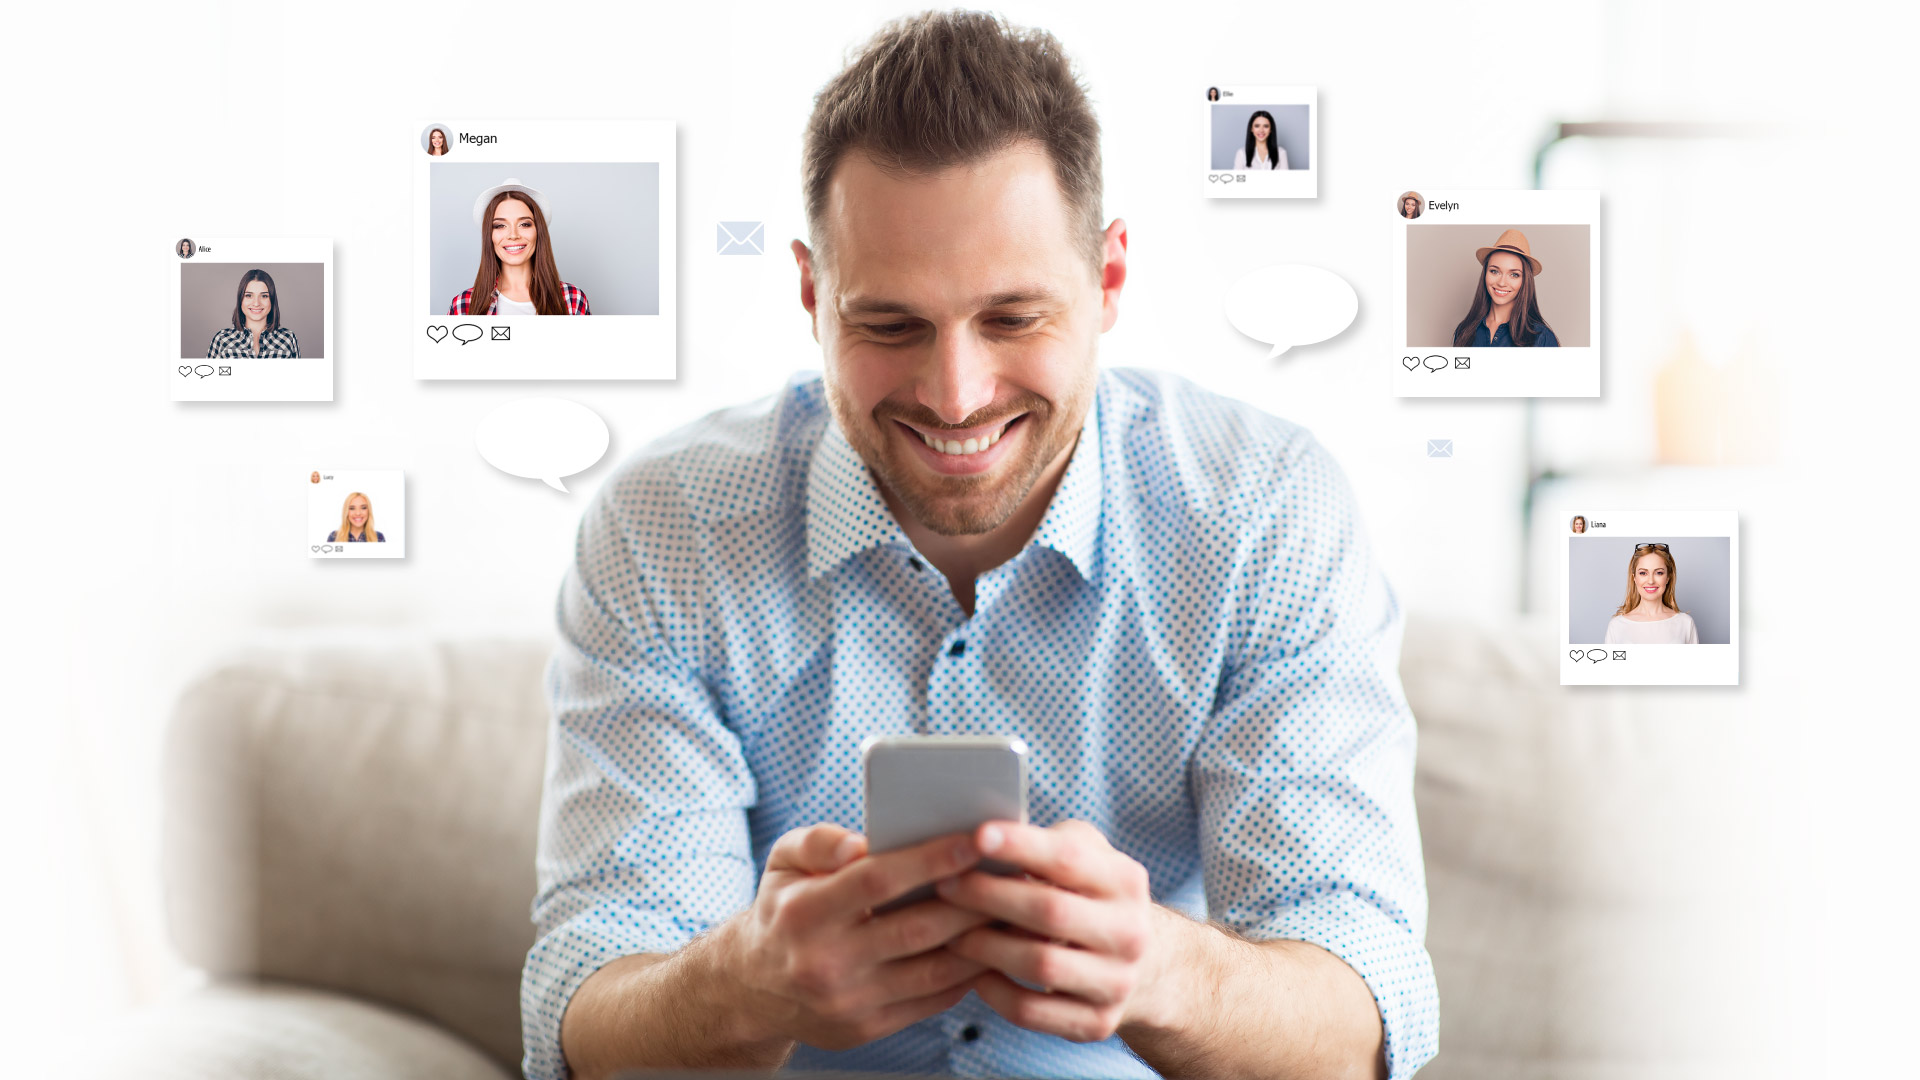 Spiky-haired man holding his phone while smiling while squares of different female dating profiles float around him.